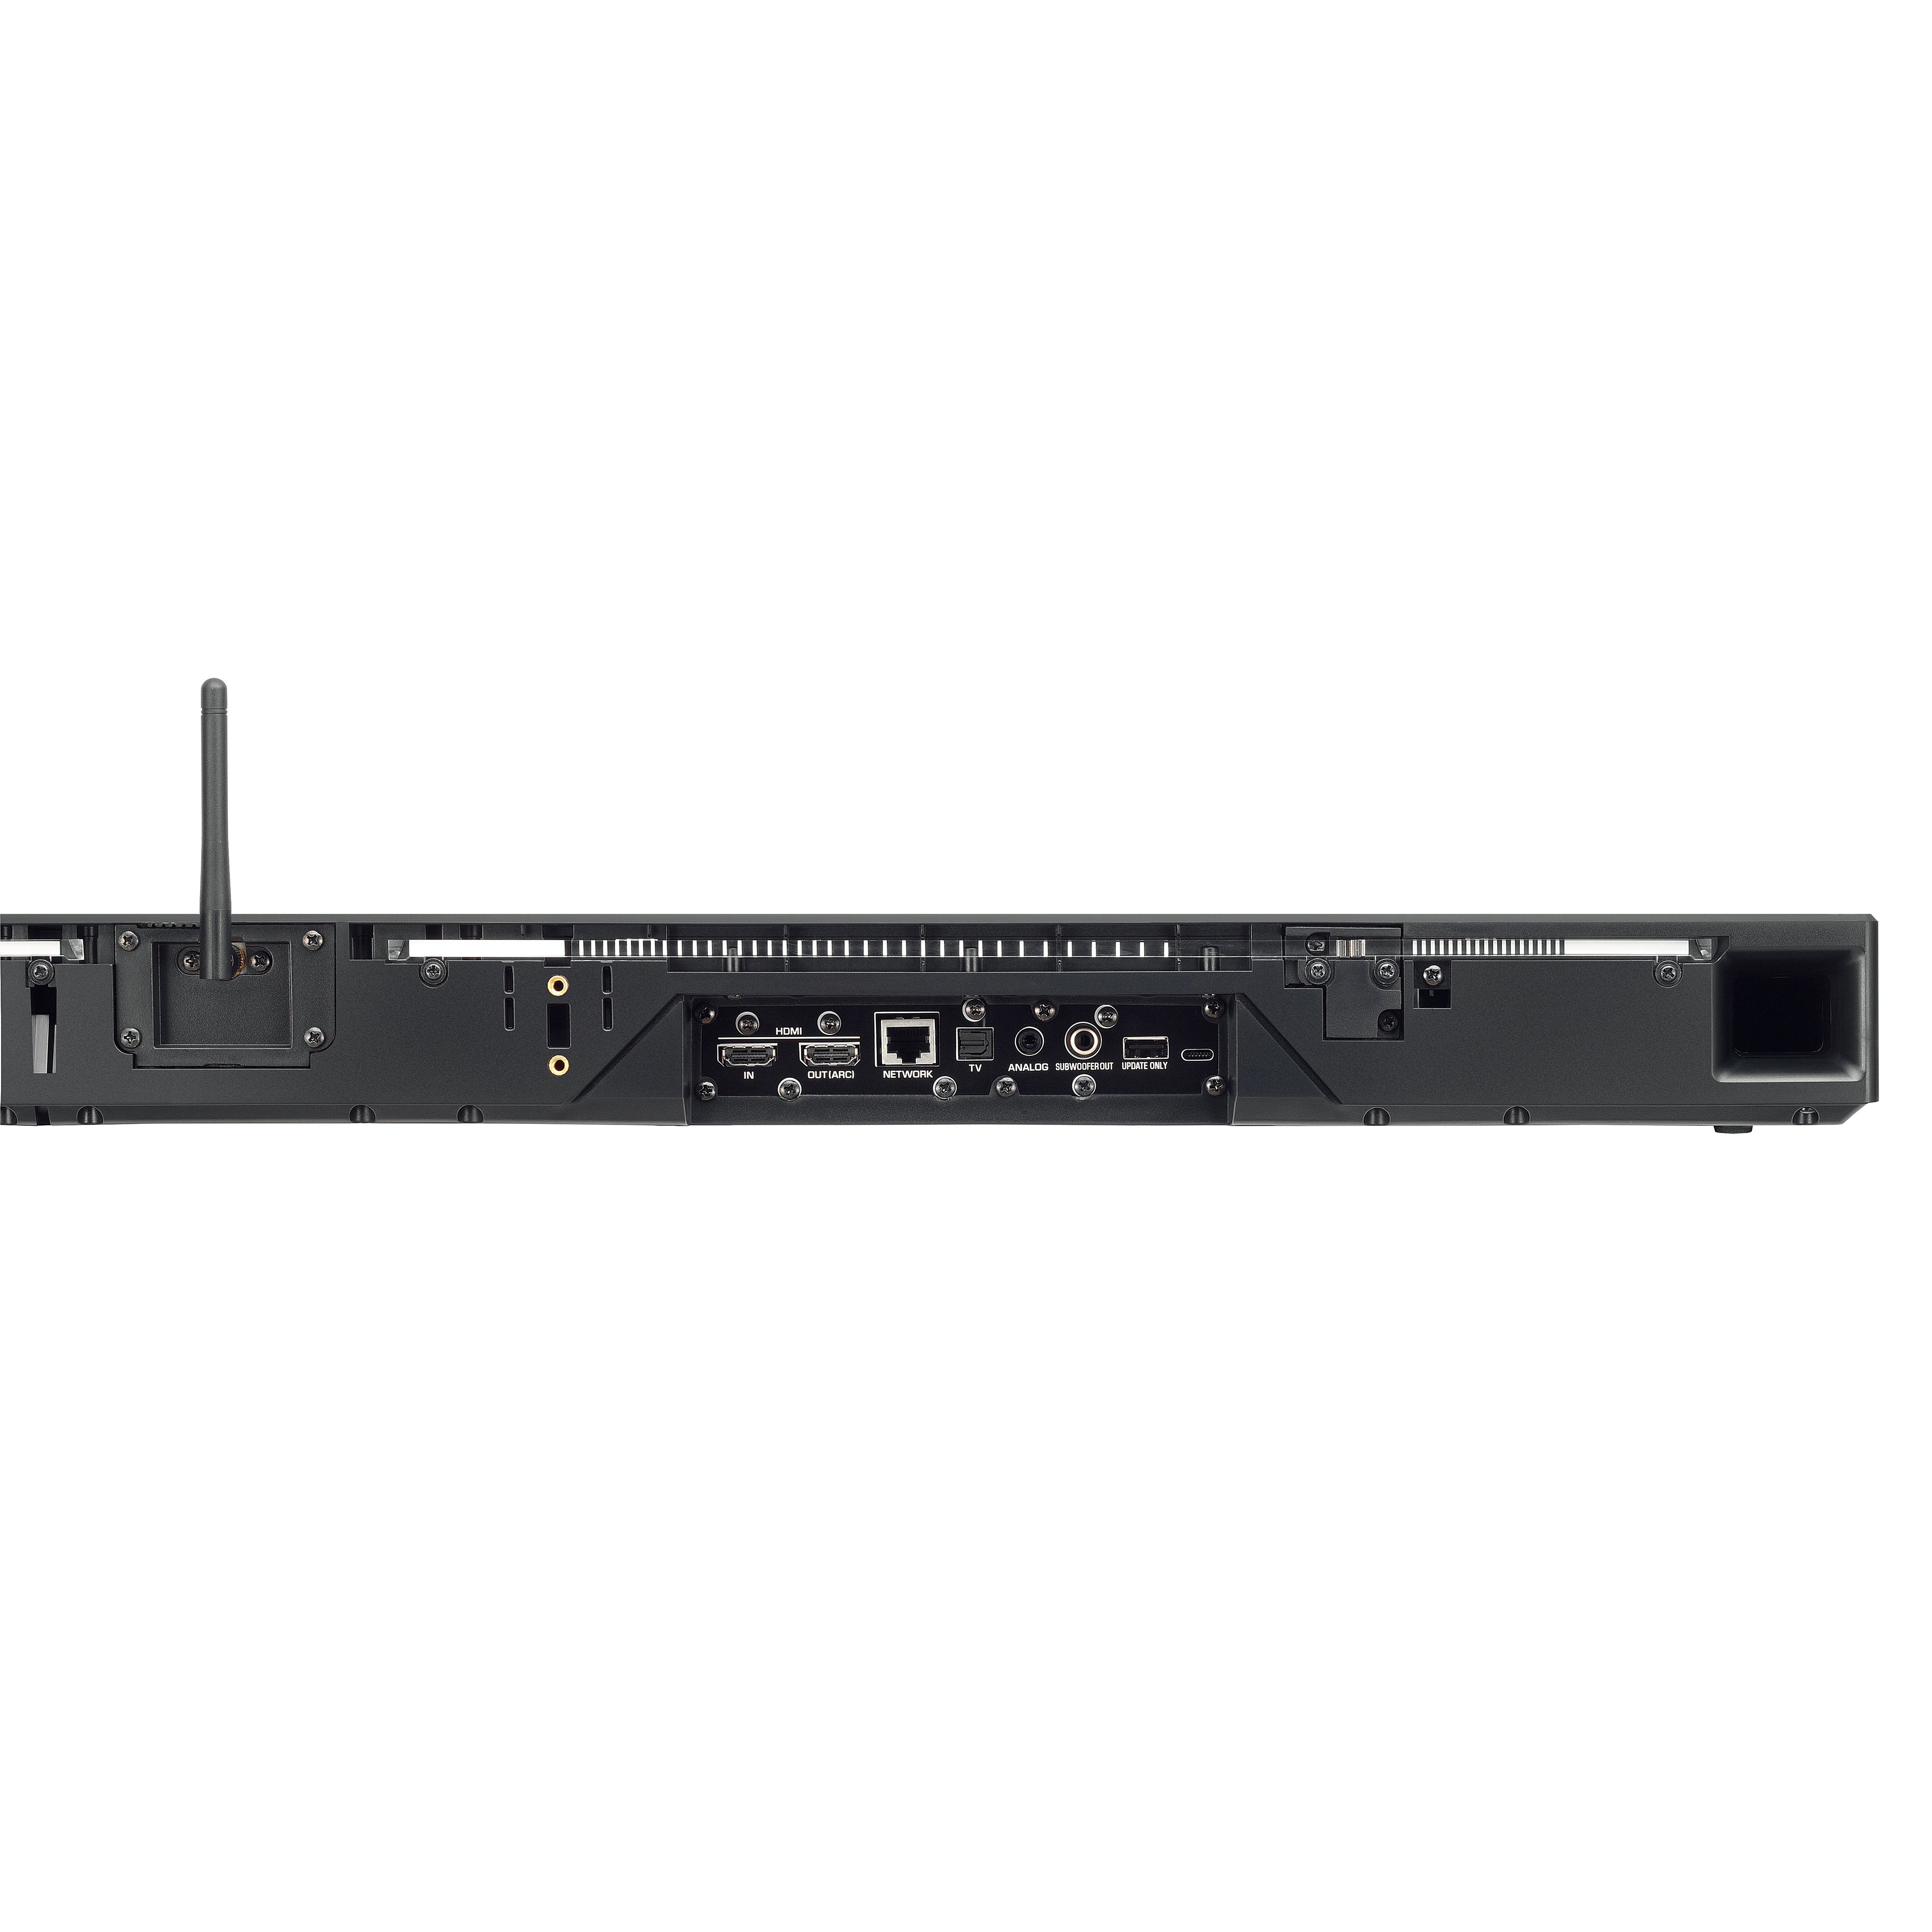 YSP-1600 - Features - Sound Bars 